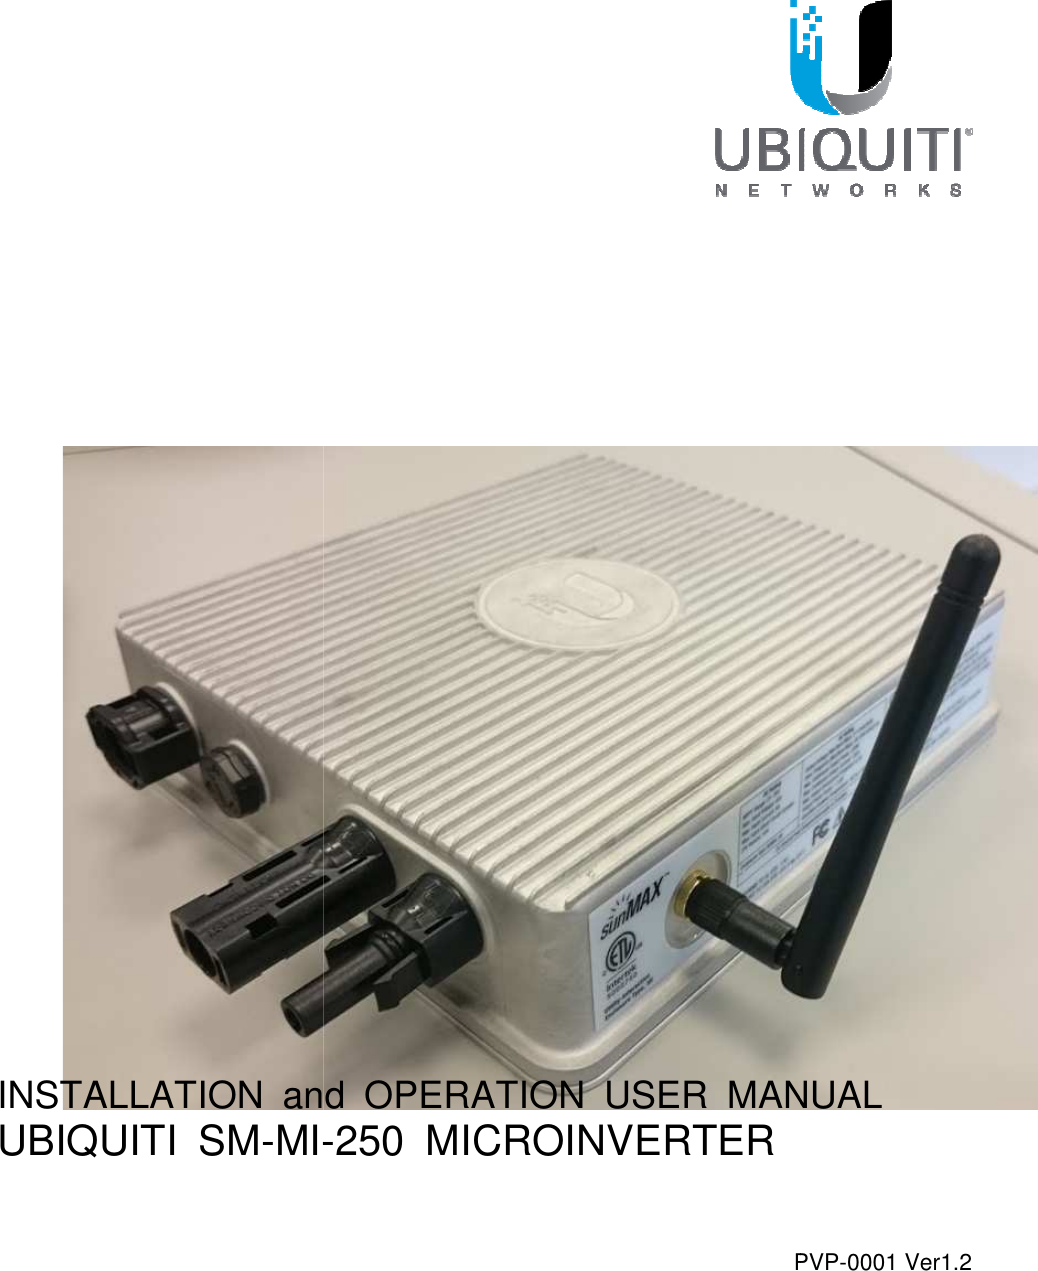                                                                                                               INSTALLATION and  OPERATION  USER UBIQUITI  SM-MI-                                                                       PVPand  OPERATION  USER MANUAL-250  MICROINVERTER  PVP-0001 Ver1.2 MANUAL 